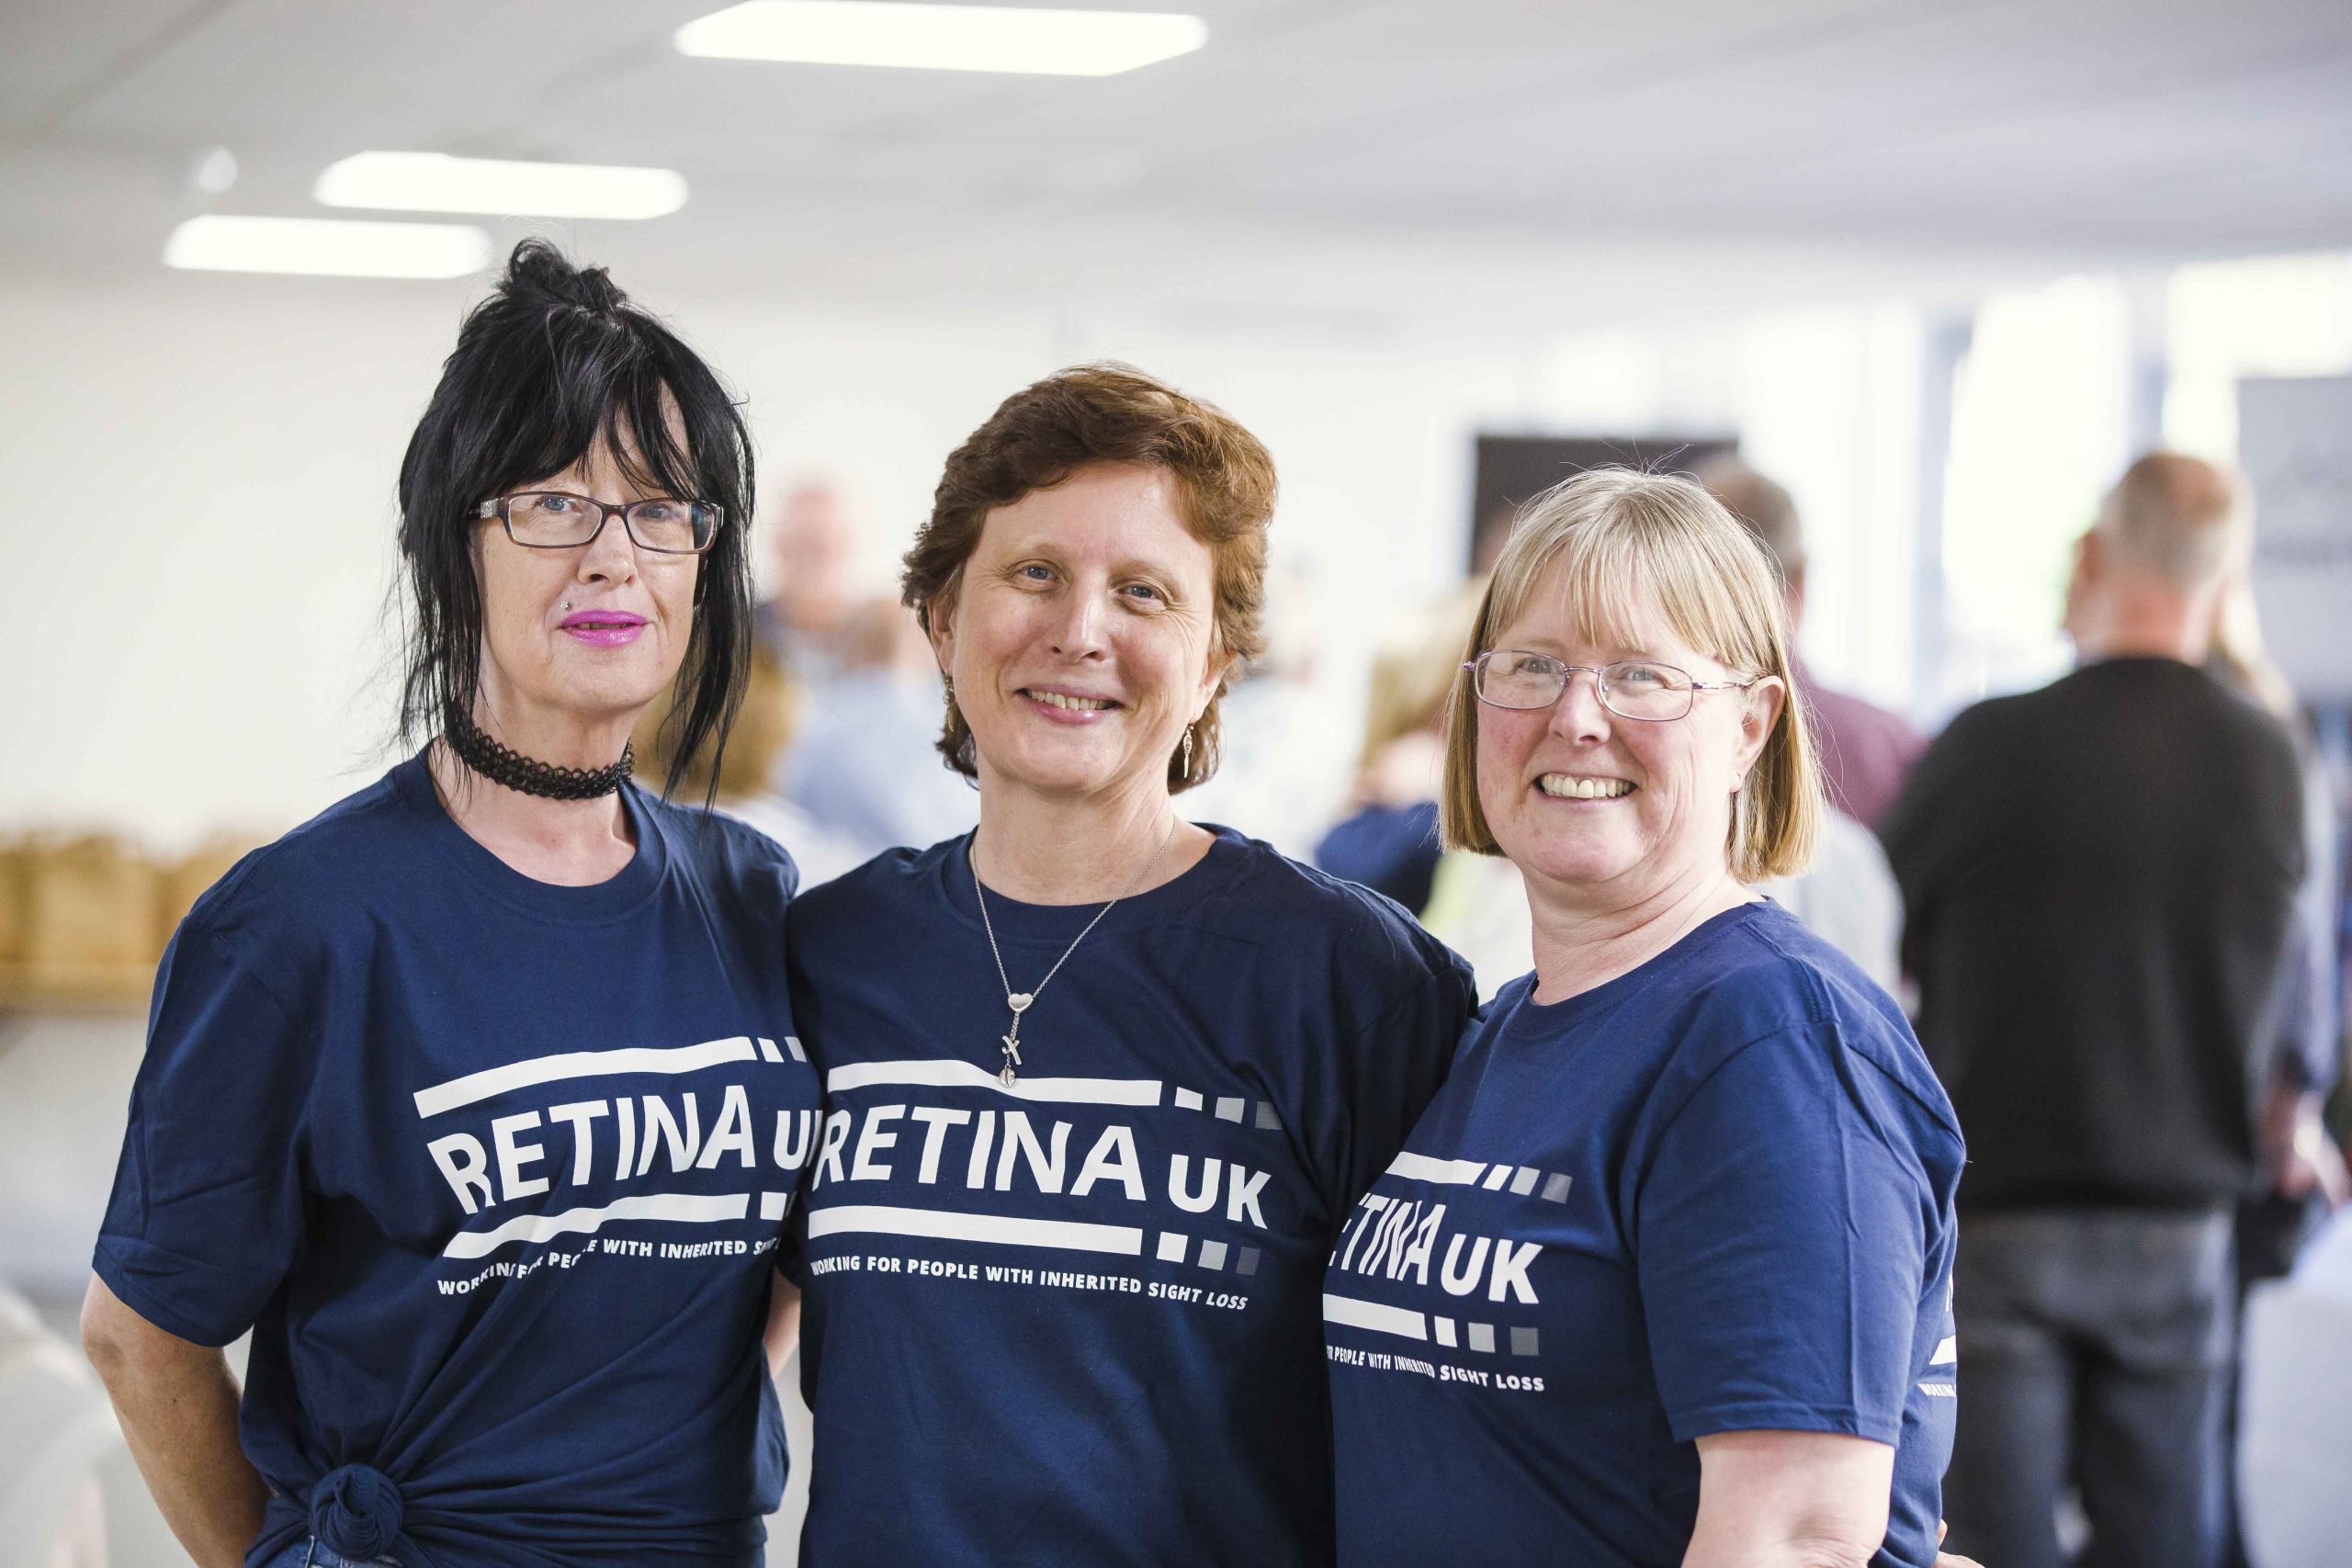 Three ladies all wearing Retina UK t-shirts. They are smiling at the camera